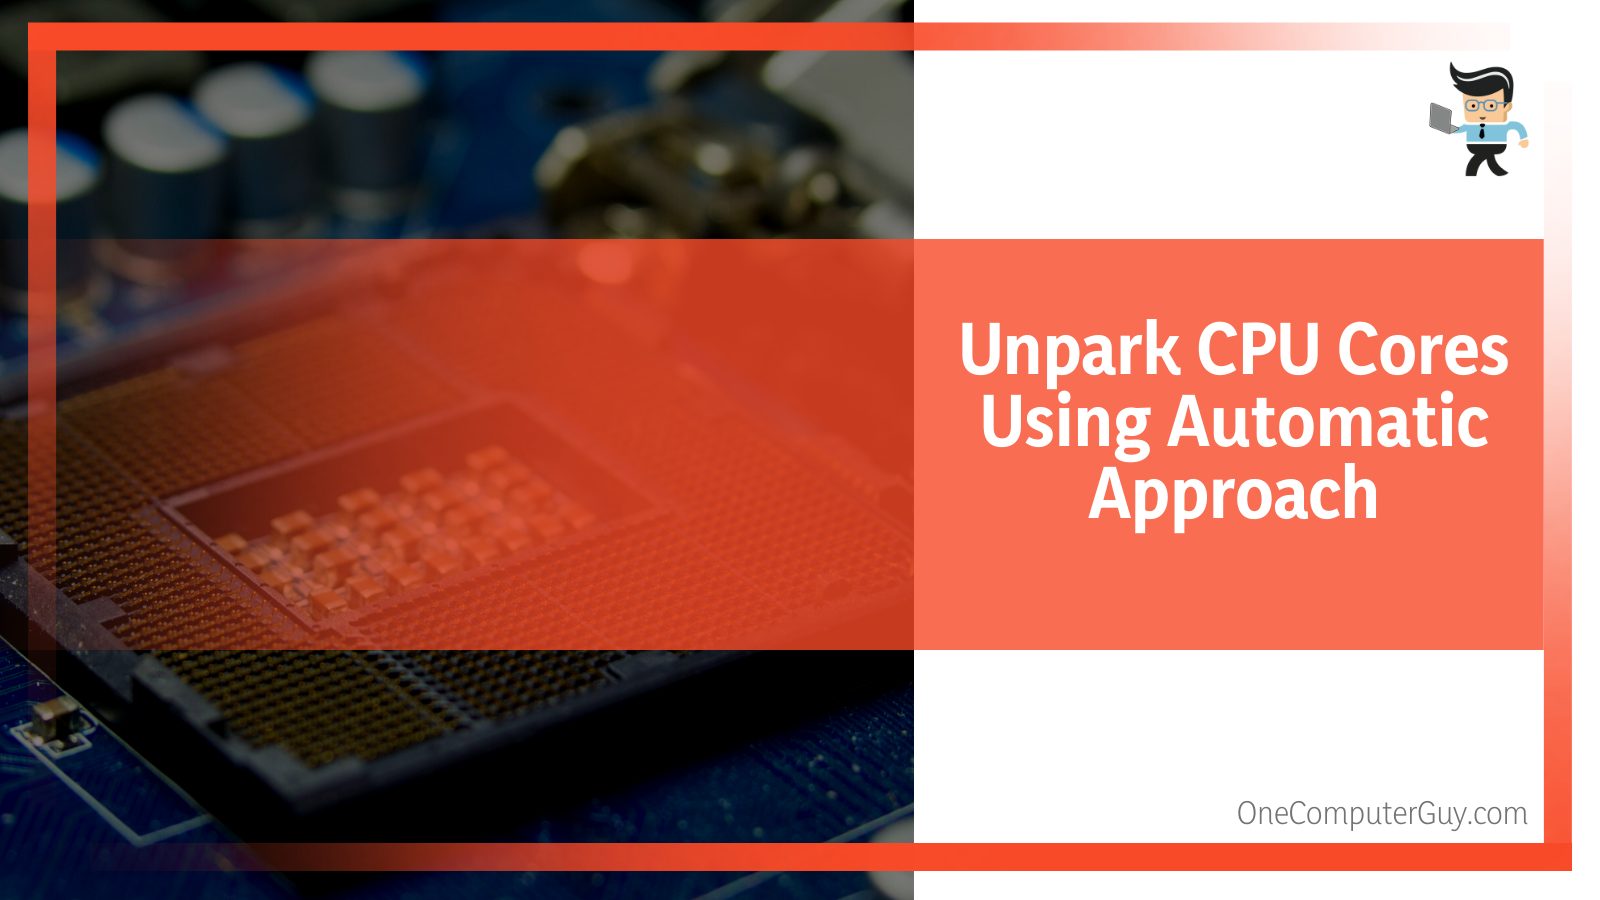 Unpark CPU Cores using Automatic Approach